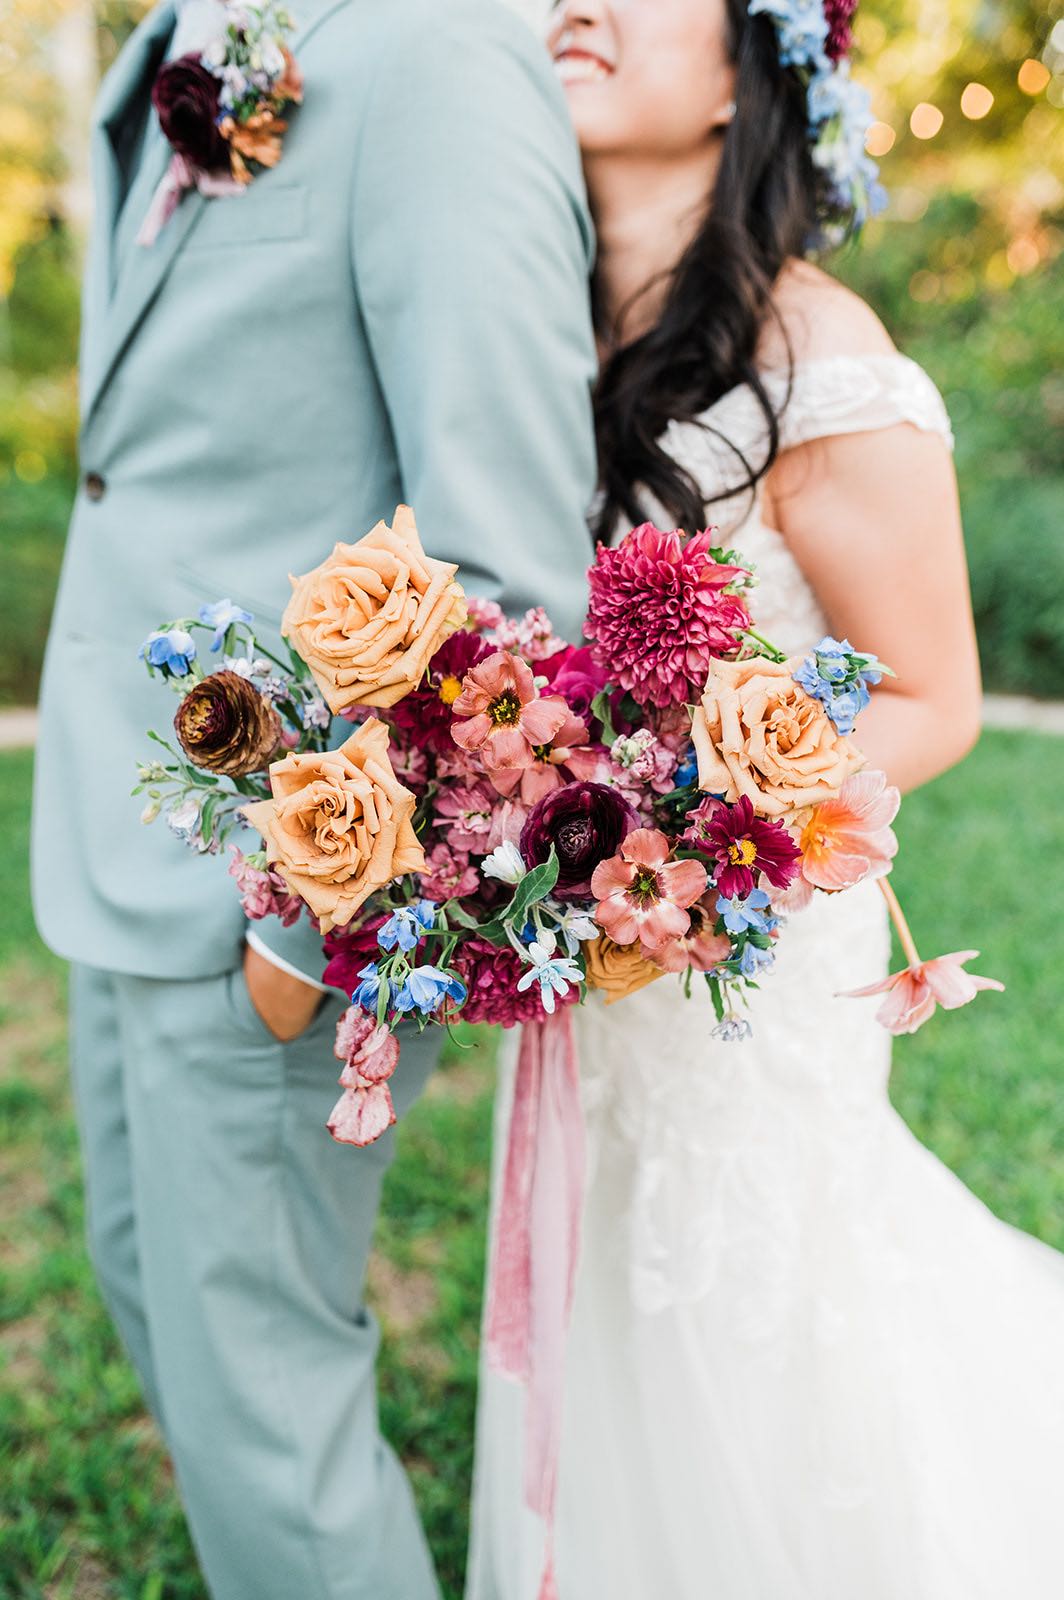 Heart shaped bridal bouquet with berry, mauve, blue and peach flowers